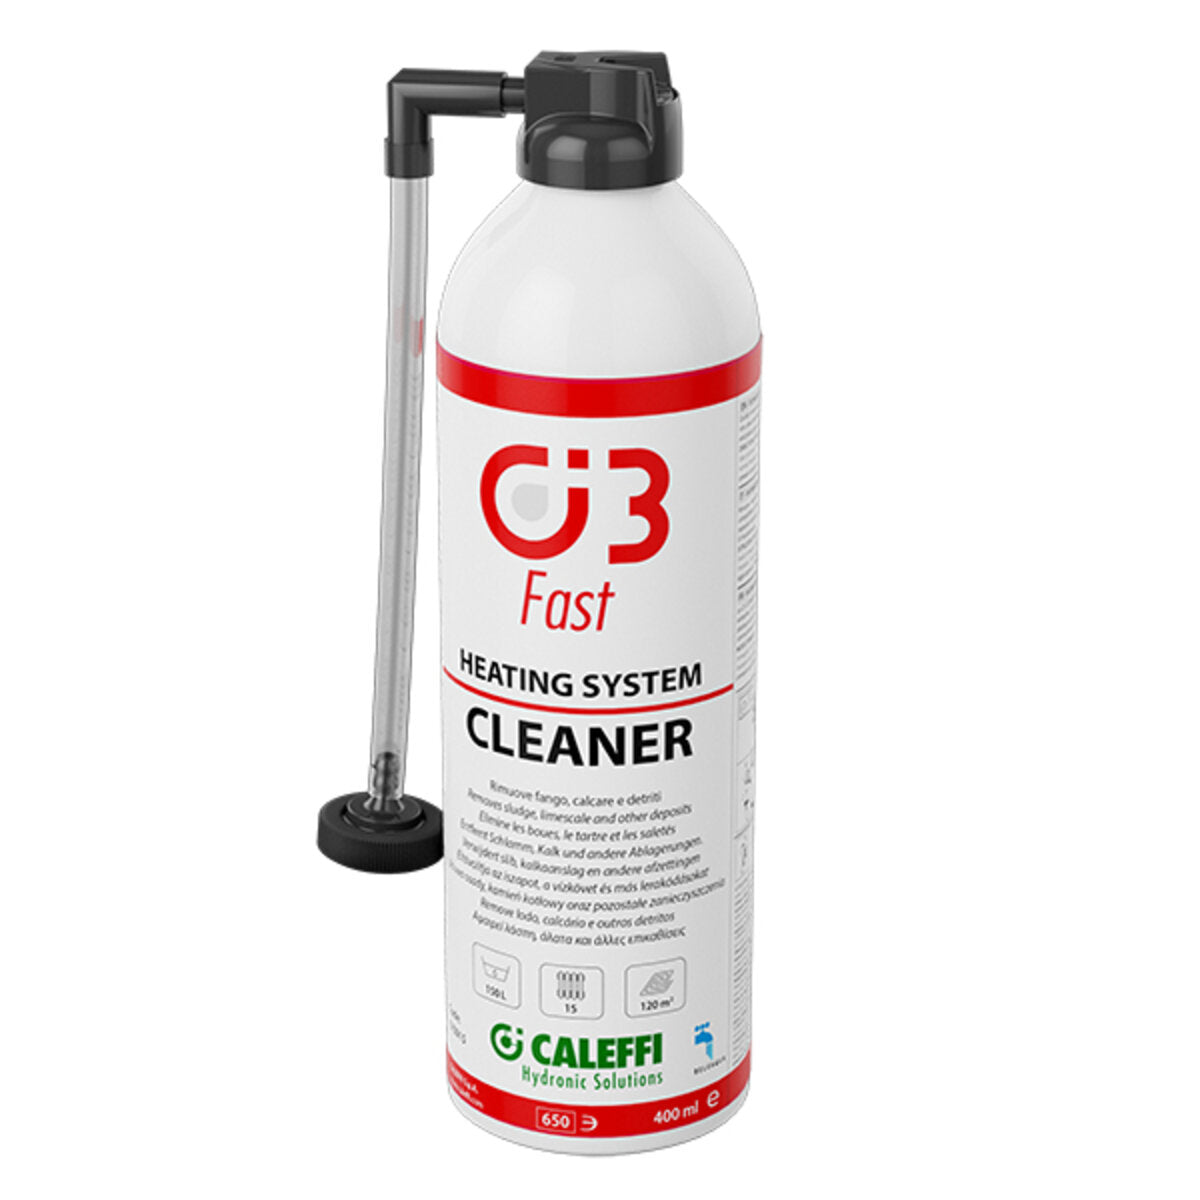 Caleffi c3 fast cleaner for heating and cooling systems